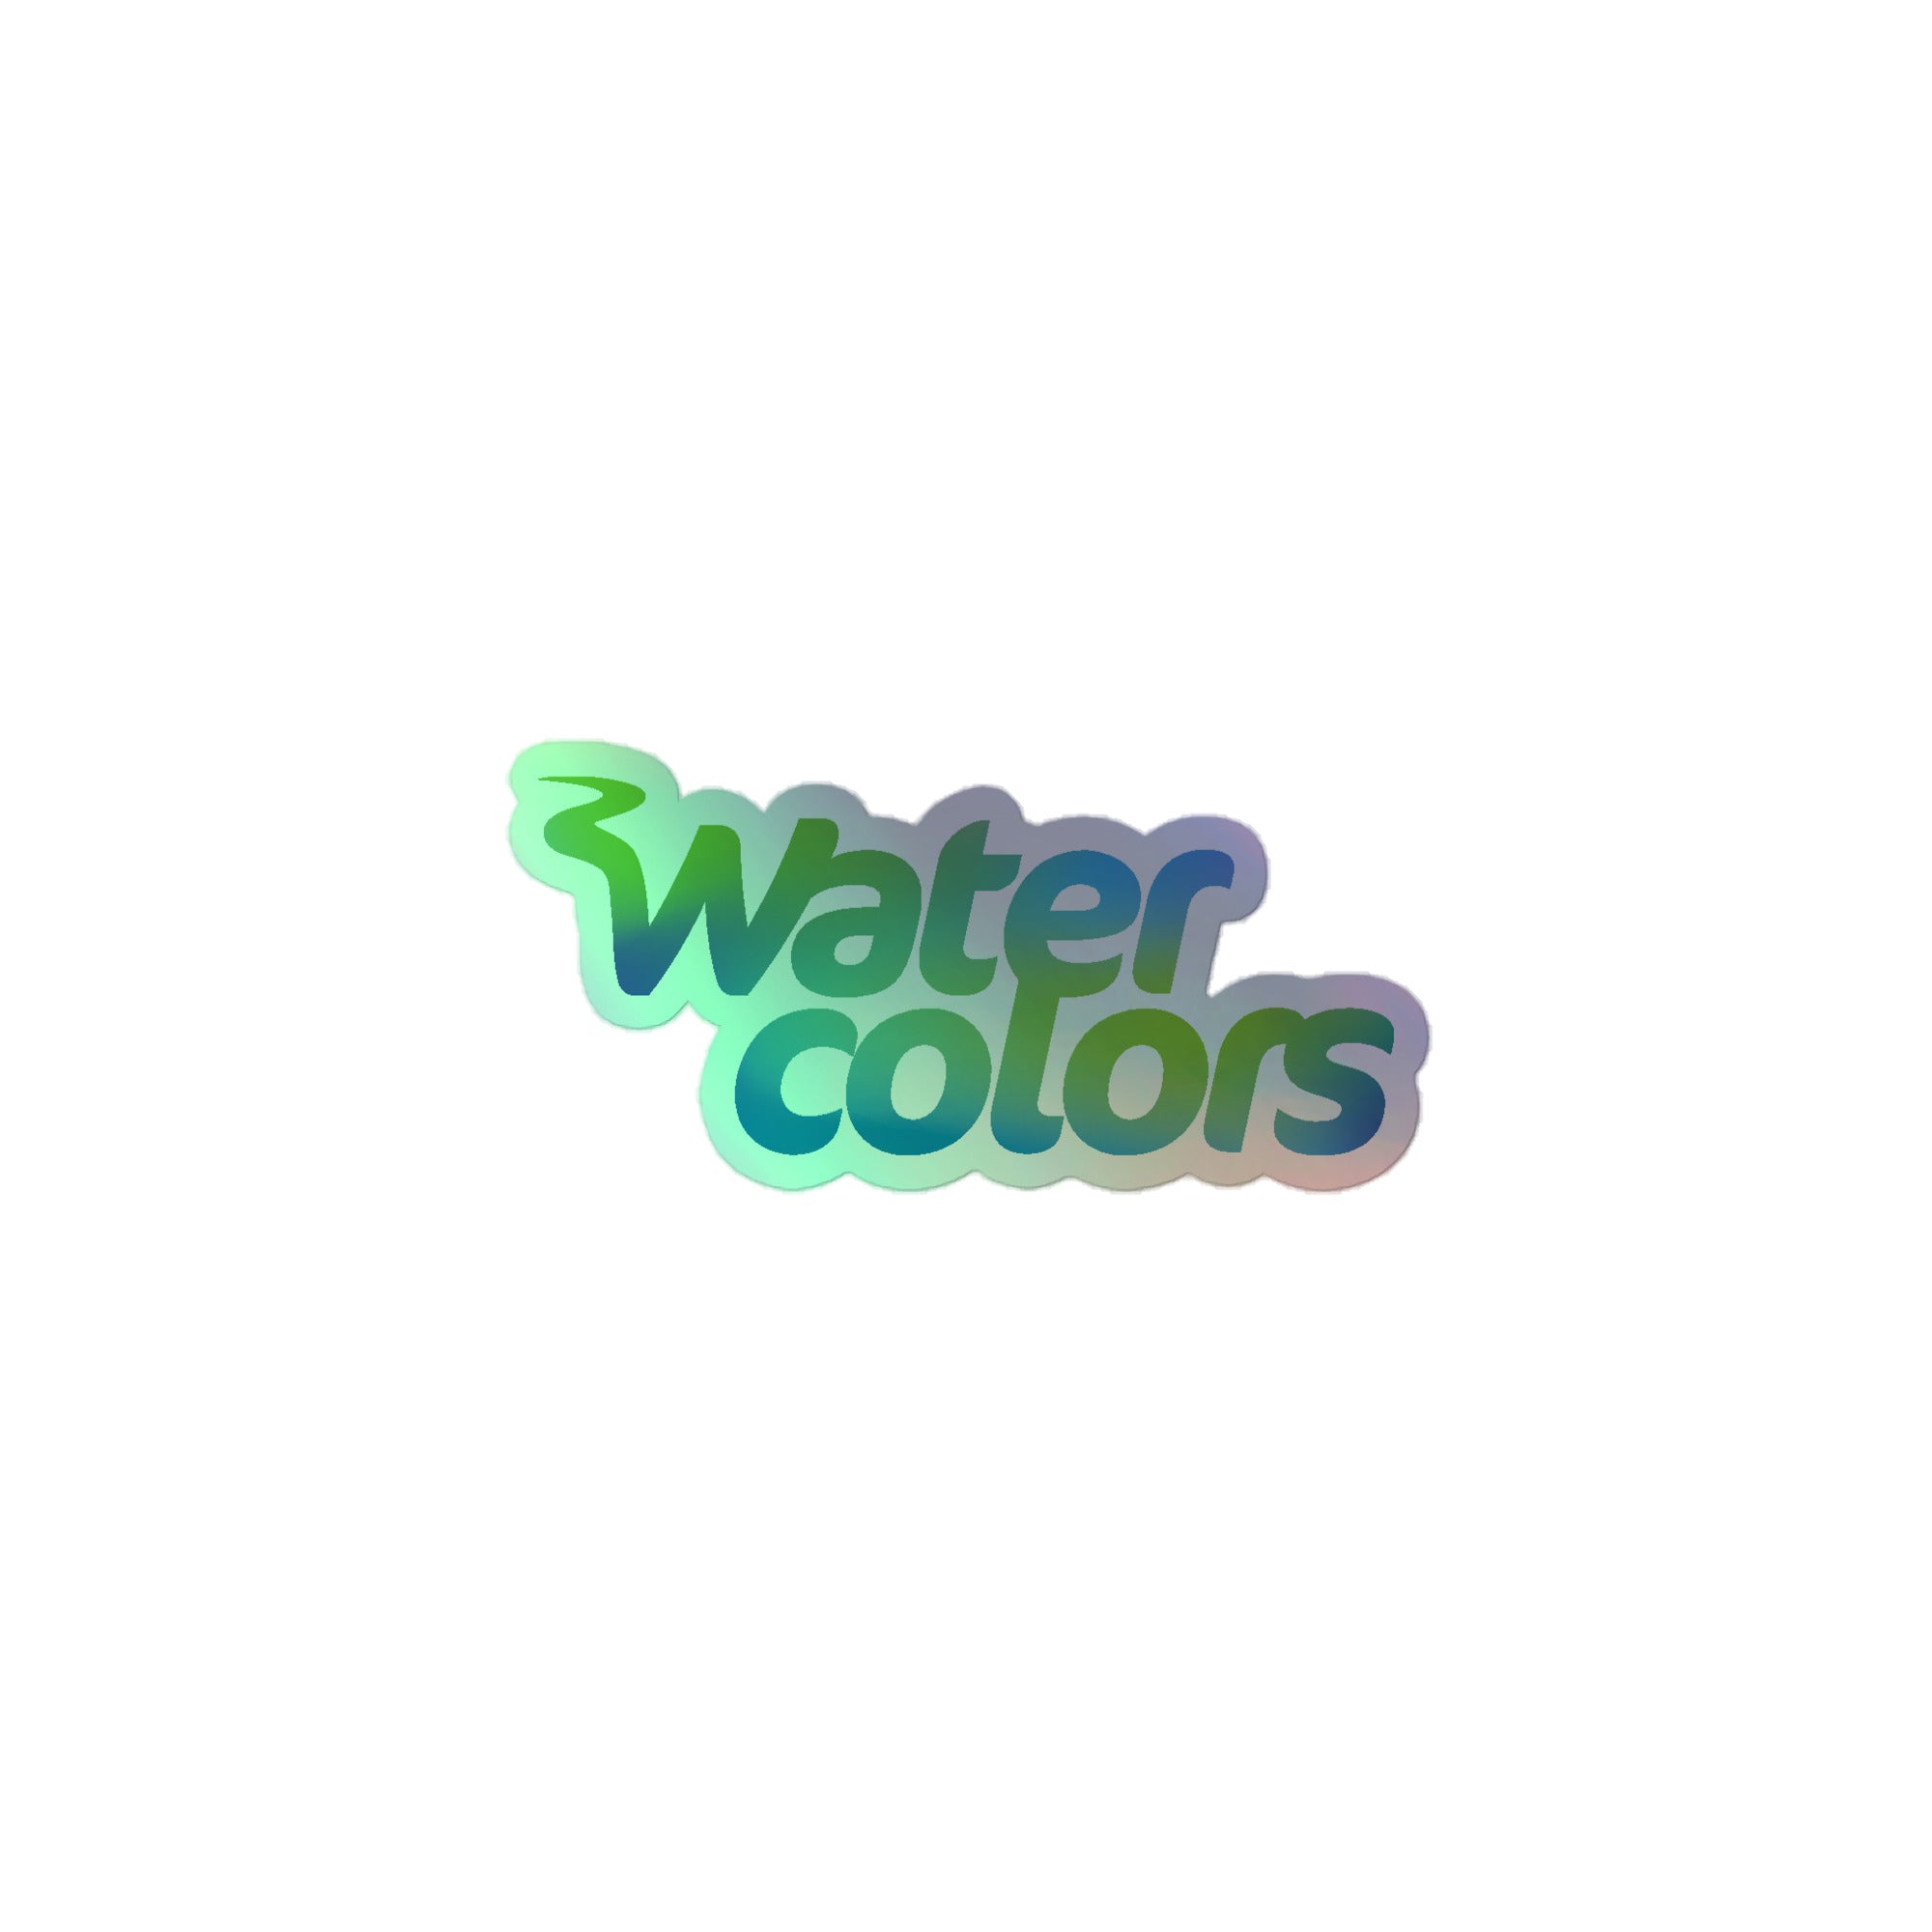 Watercolors: Holographic Sticker